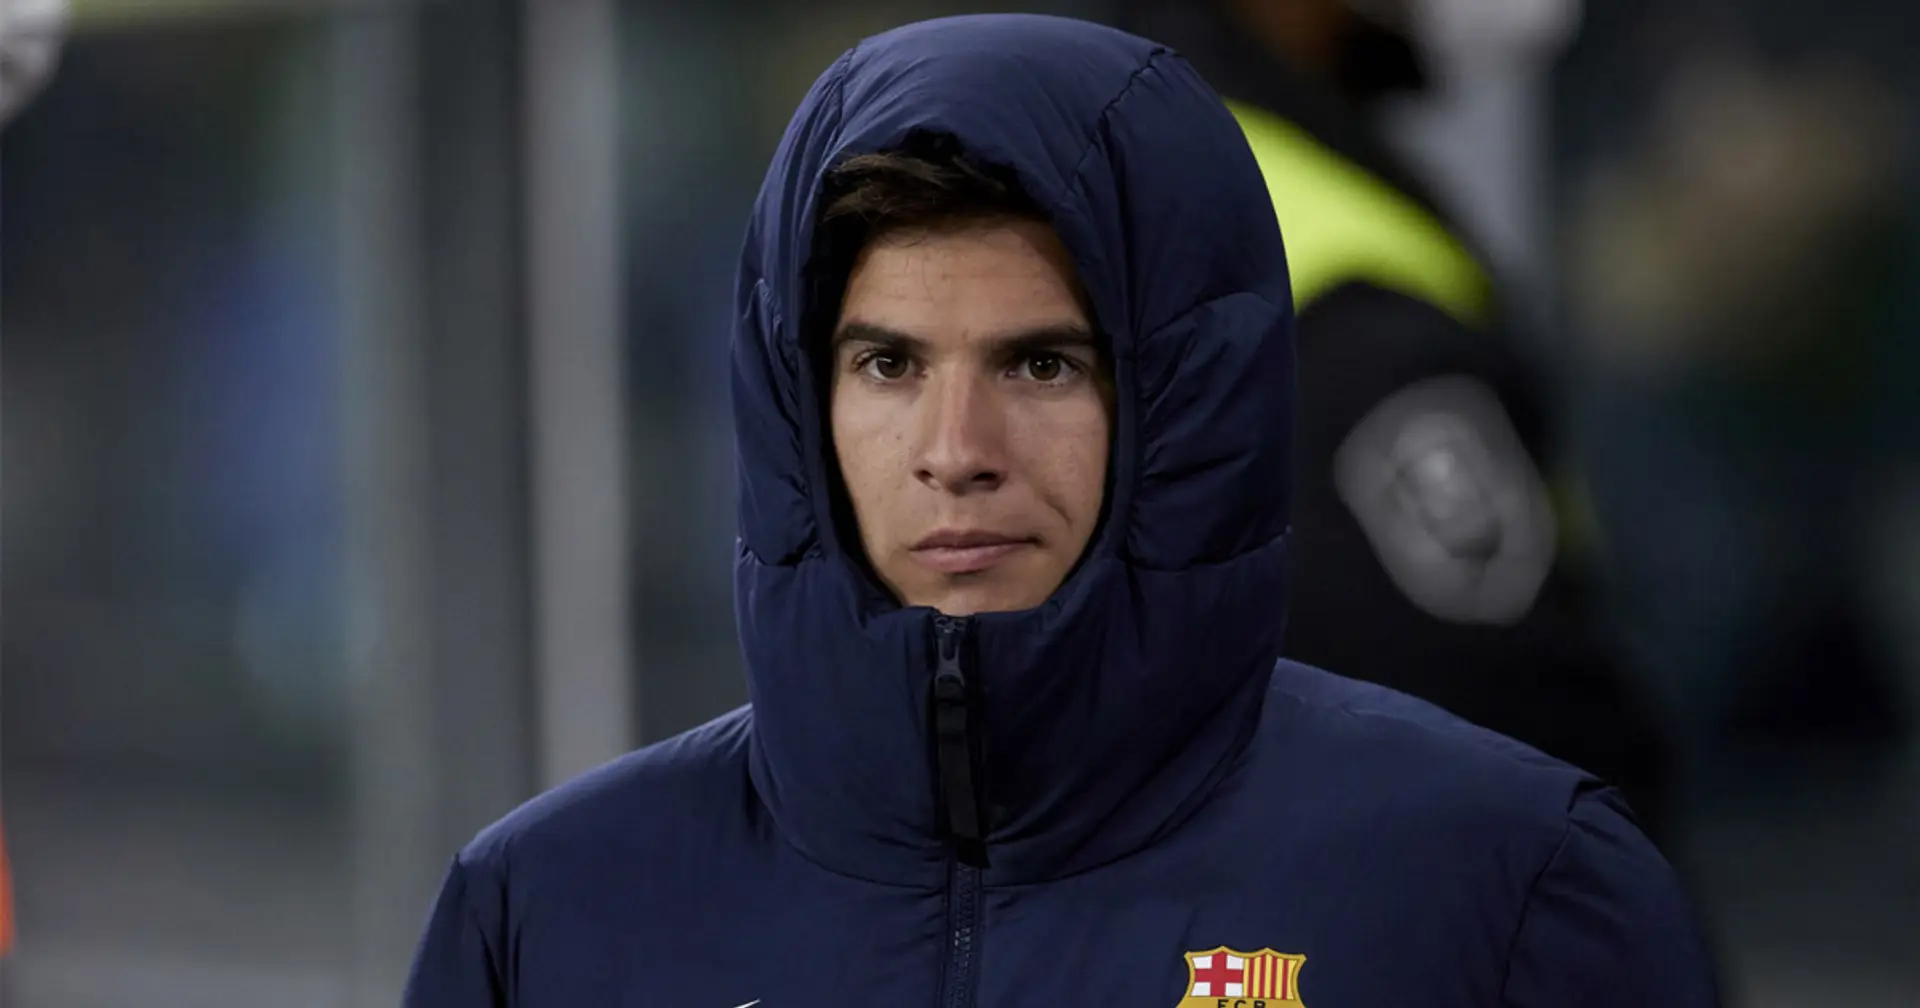 Riqui Puig expected to get first start in 4 months vs Celta Vigo